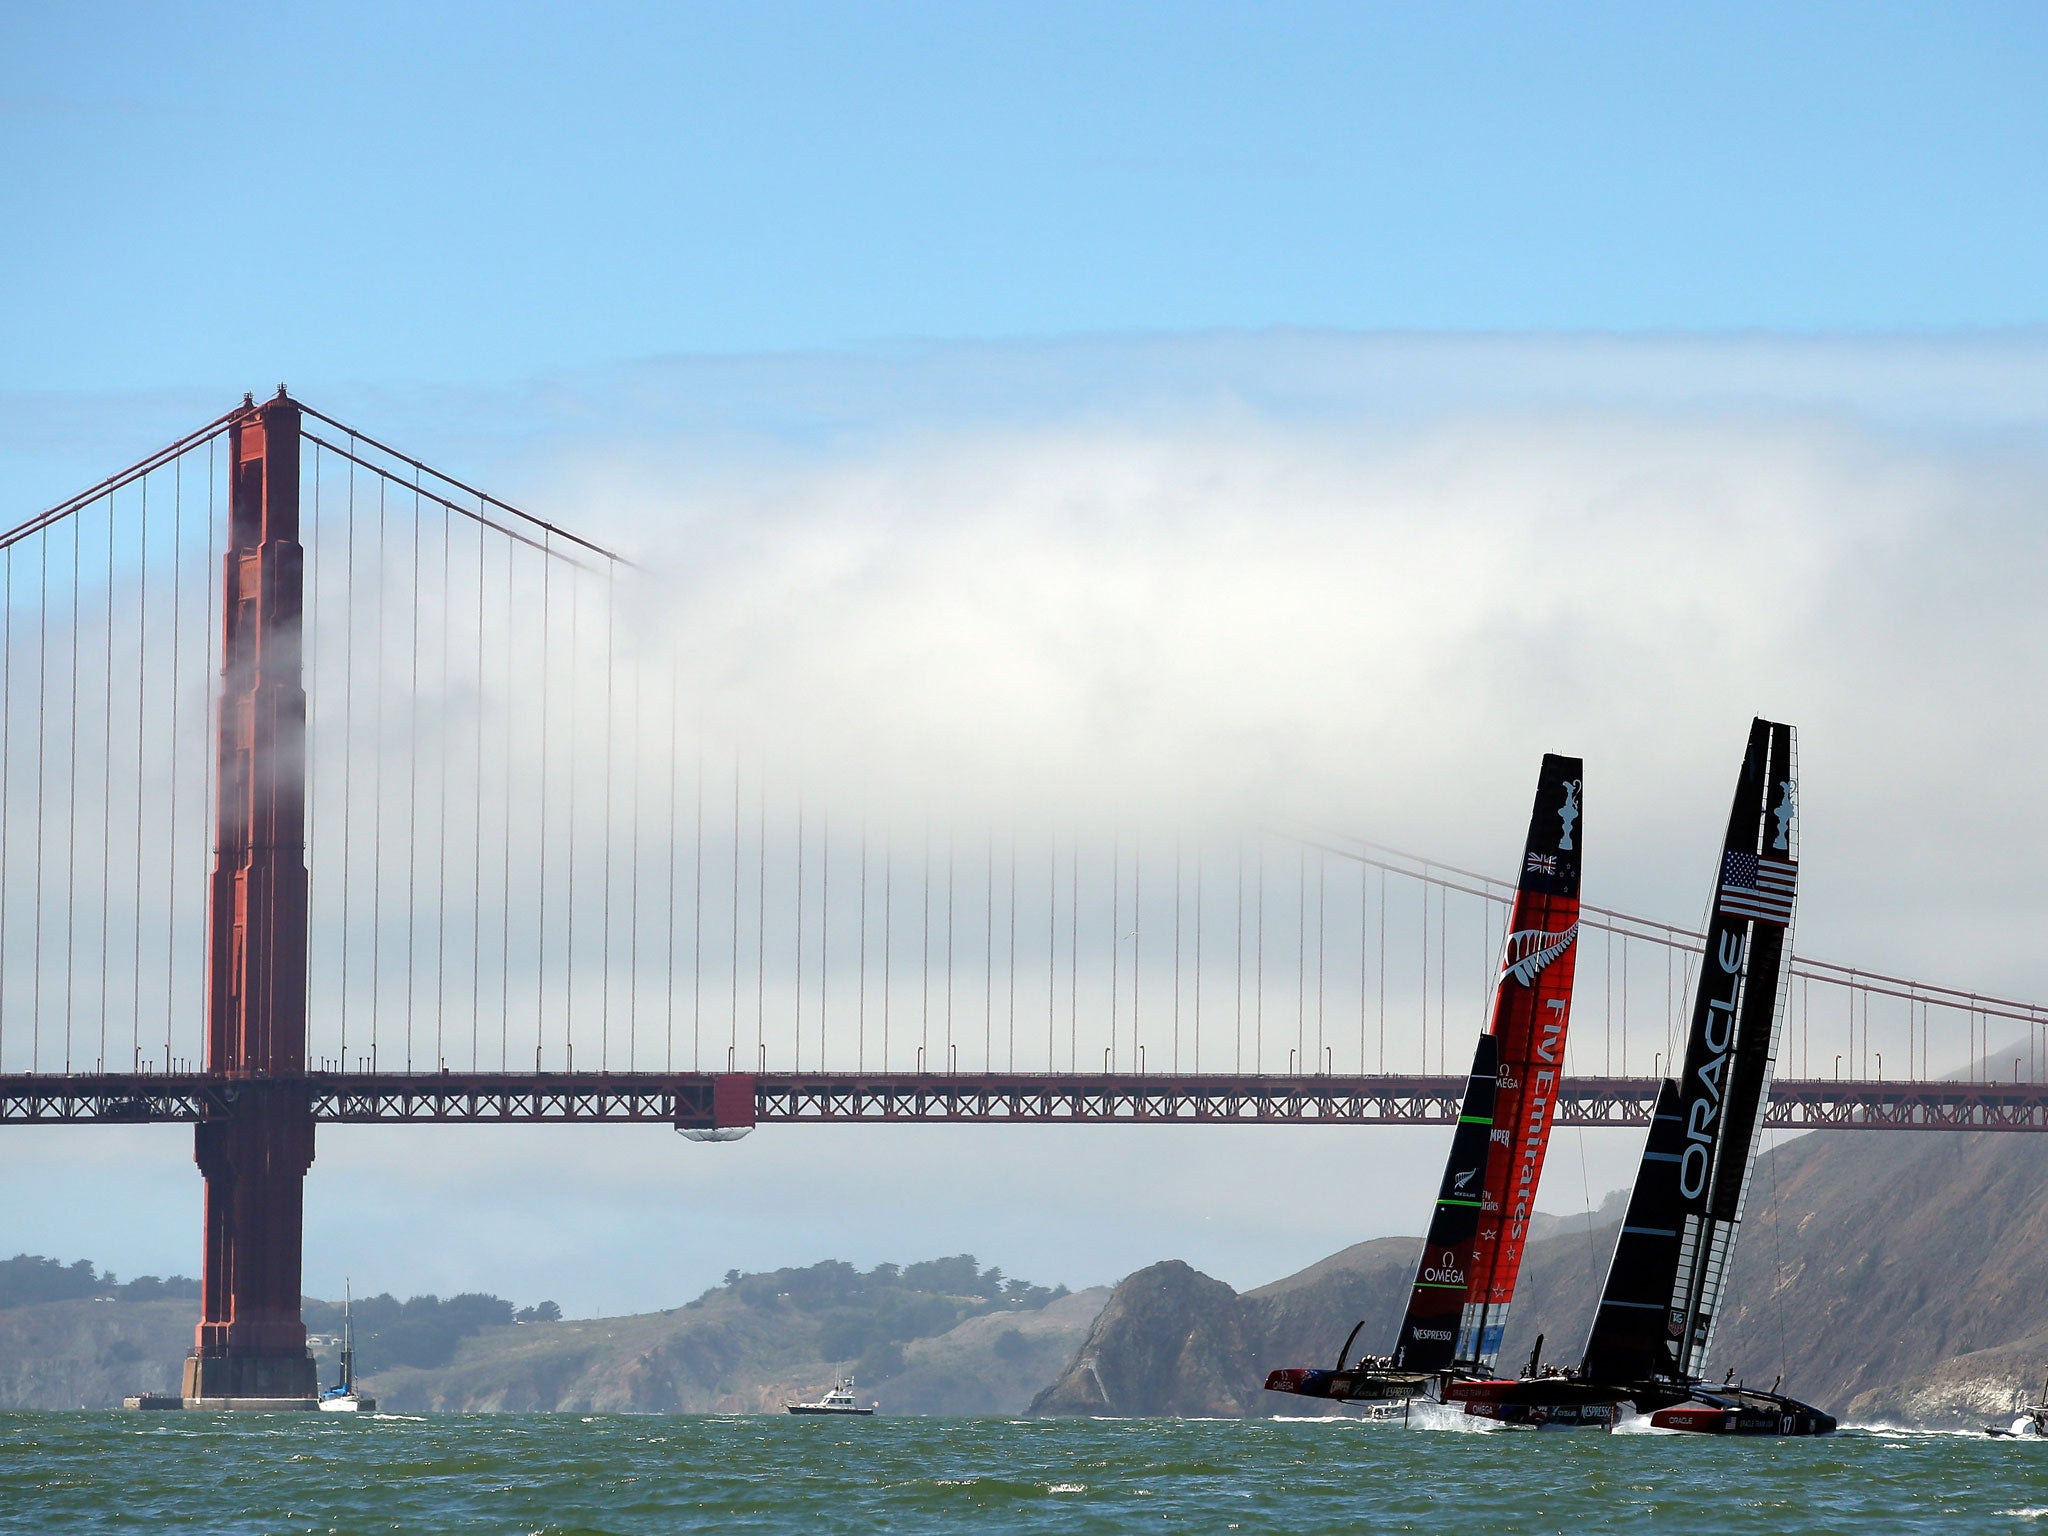 Oracle Team USA has closed the gap on the challenger, Emirates Team New Zealand but still trails 6-8